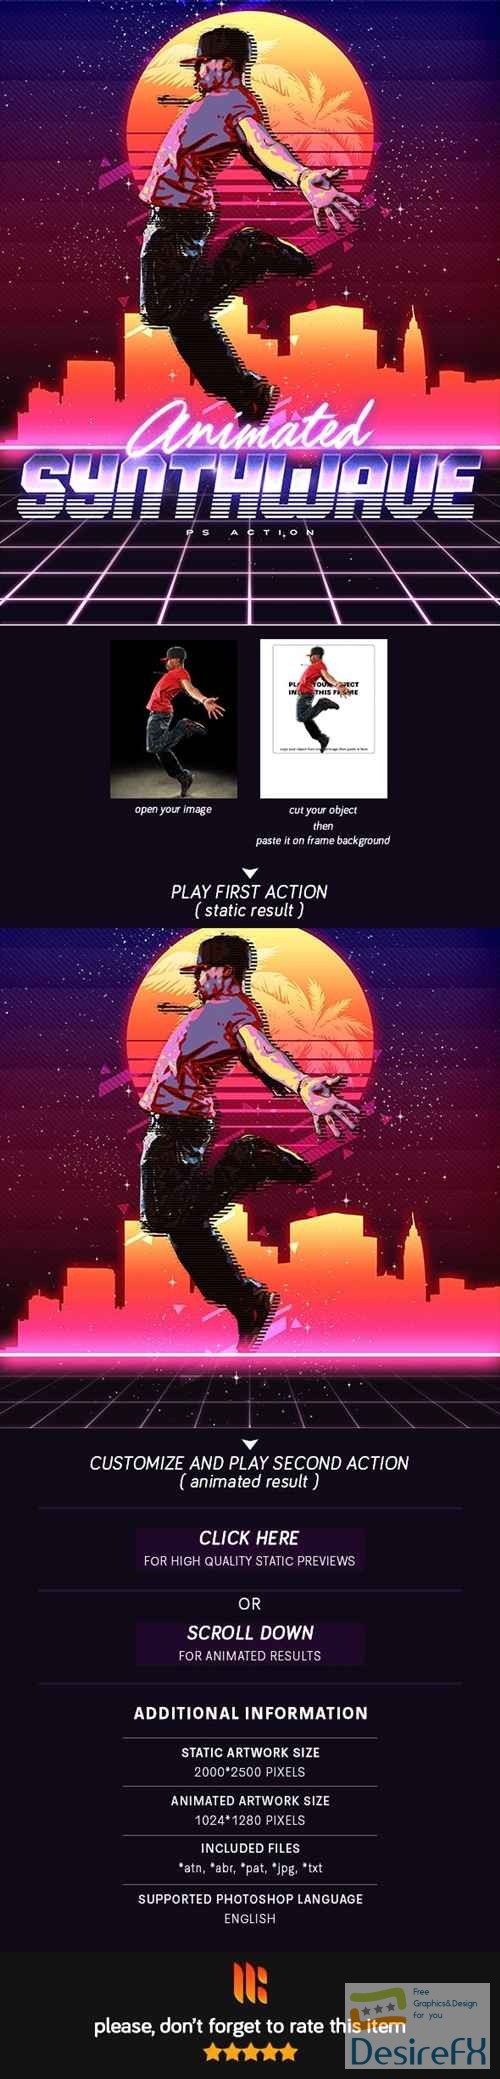 Download Download Animated 80's Synthwave Poster - Photoshop Action 23109854 | DesireFX.COM